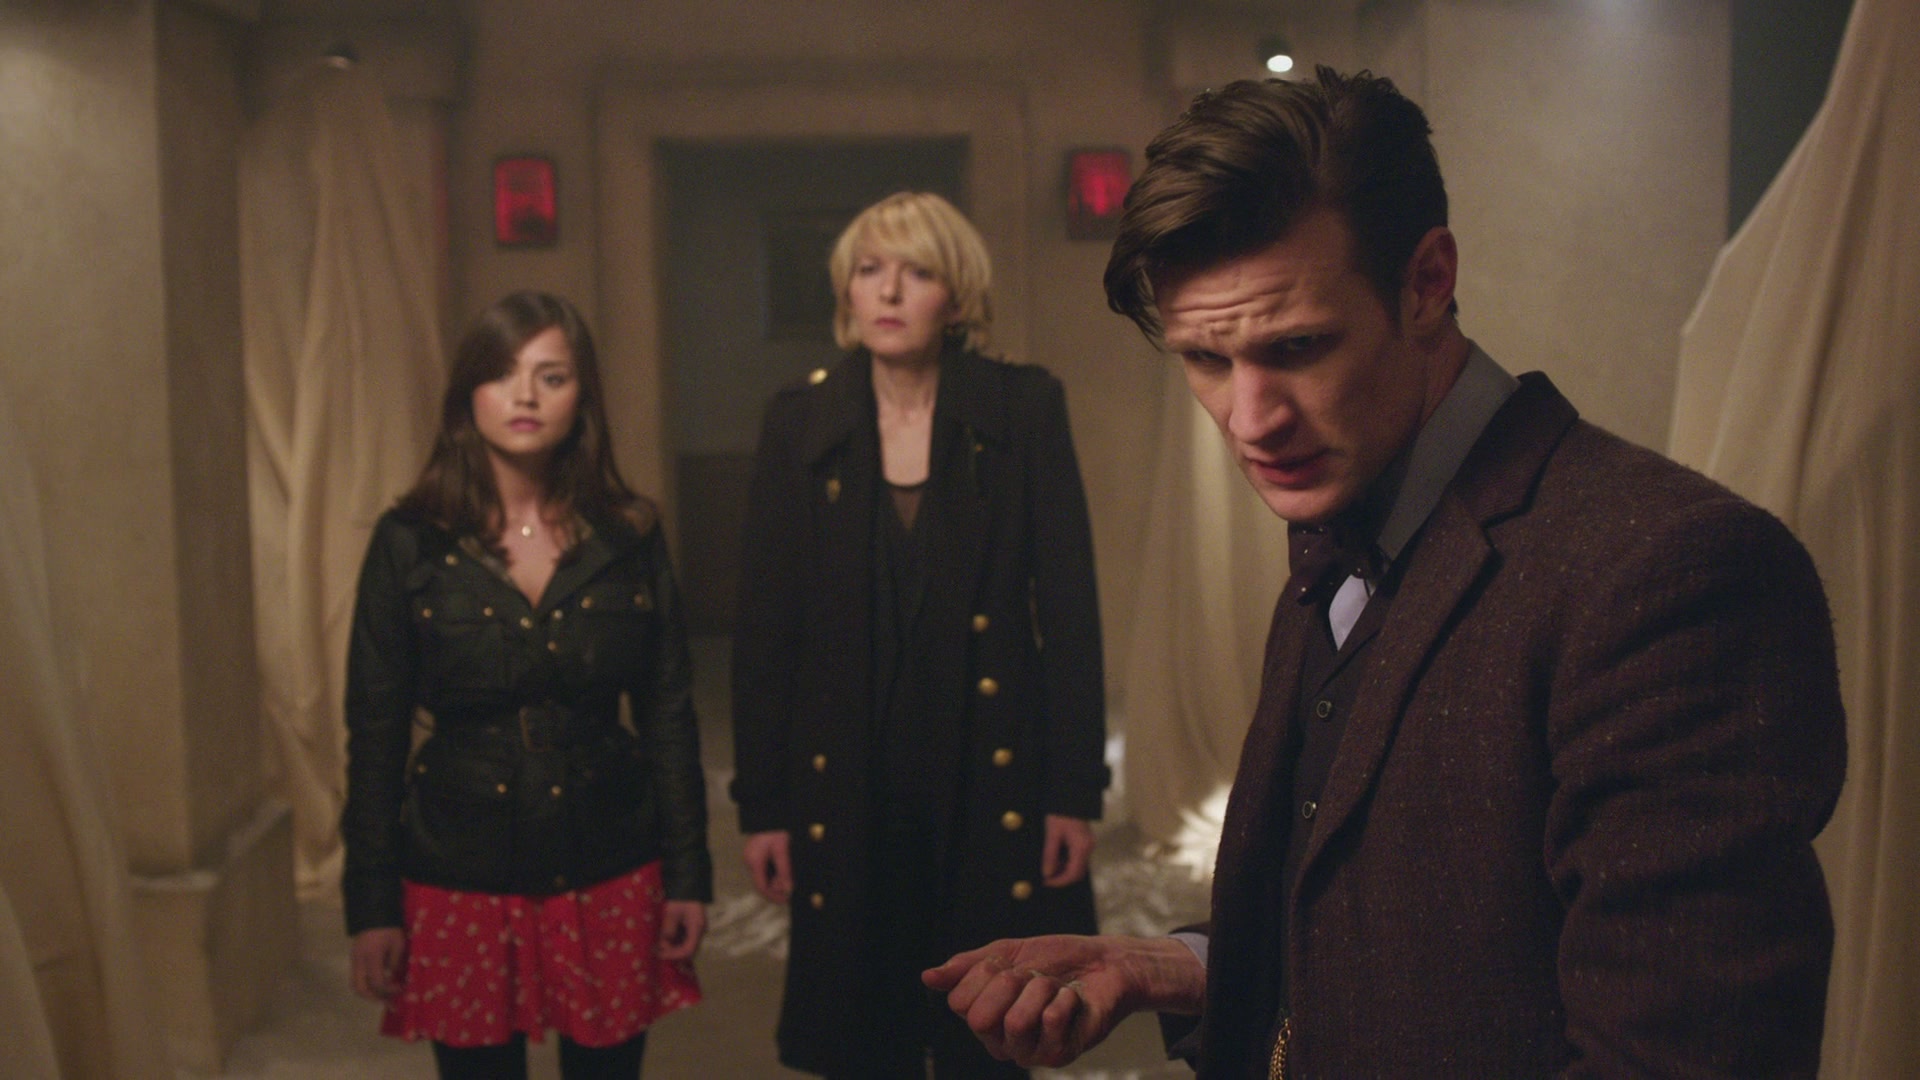 DayOfTheDoctor-Caps-0305.jpg